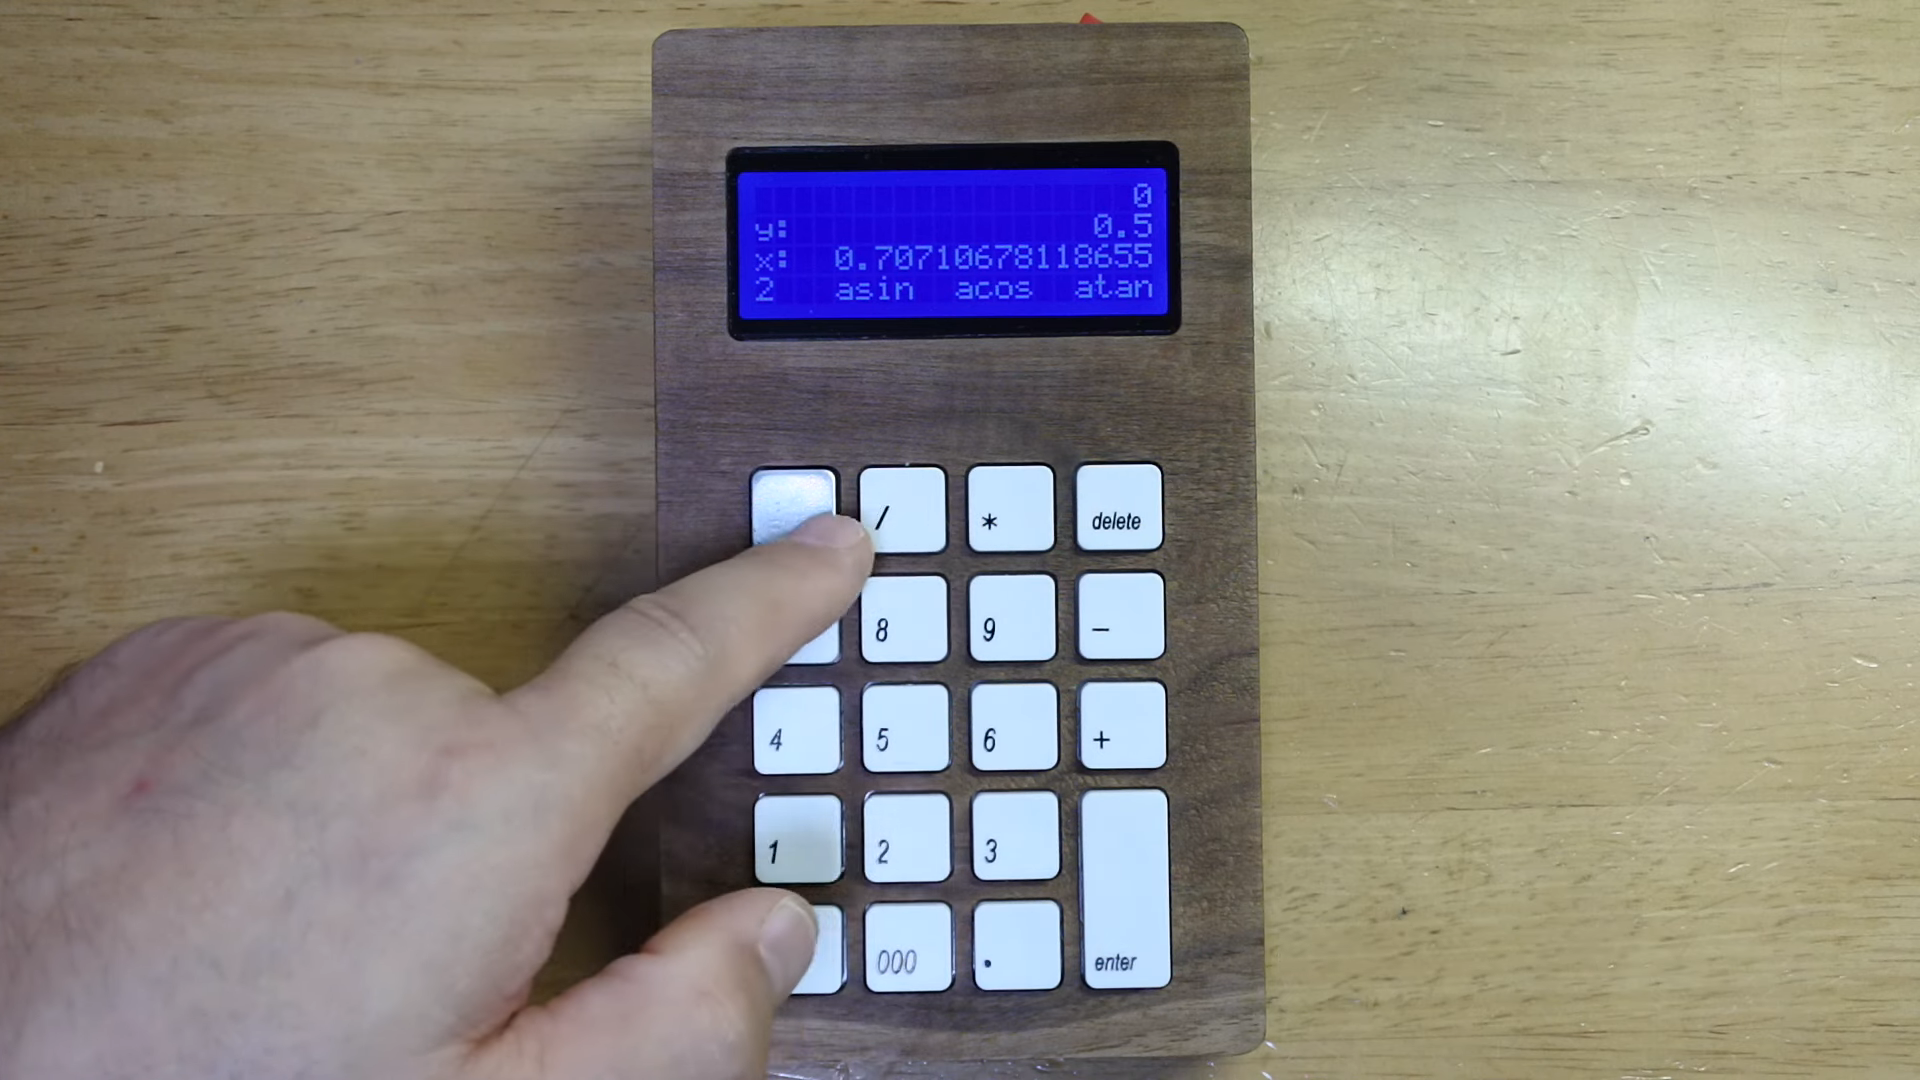 Walnut Case Units This Customized Arduino-Powered RPN Calculator Aside From The Crowd